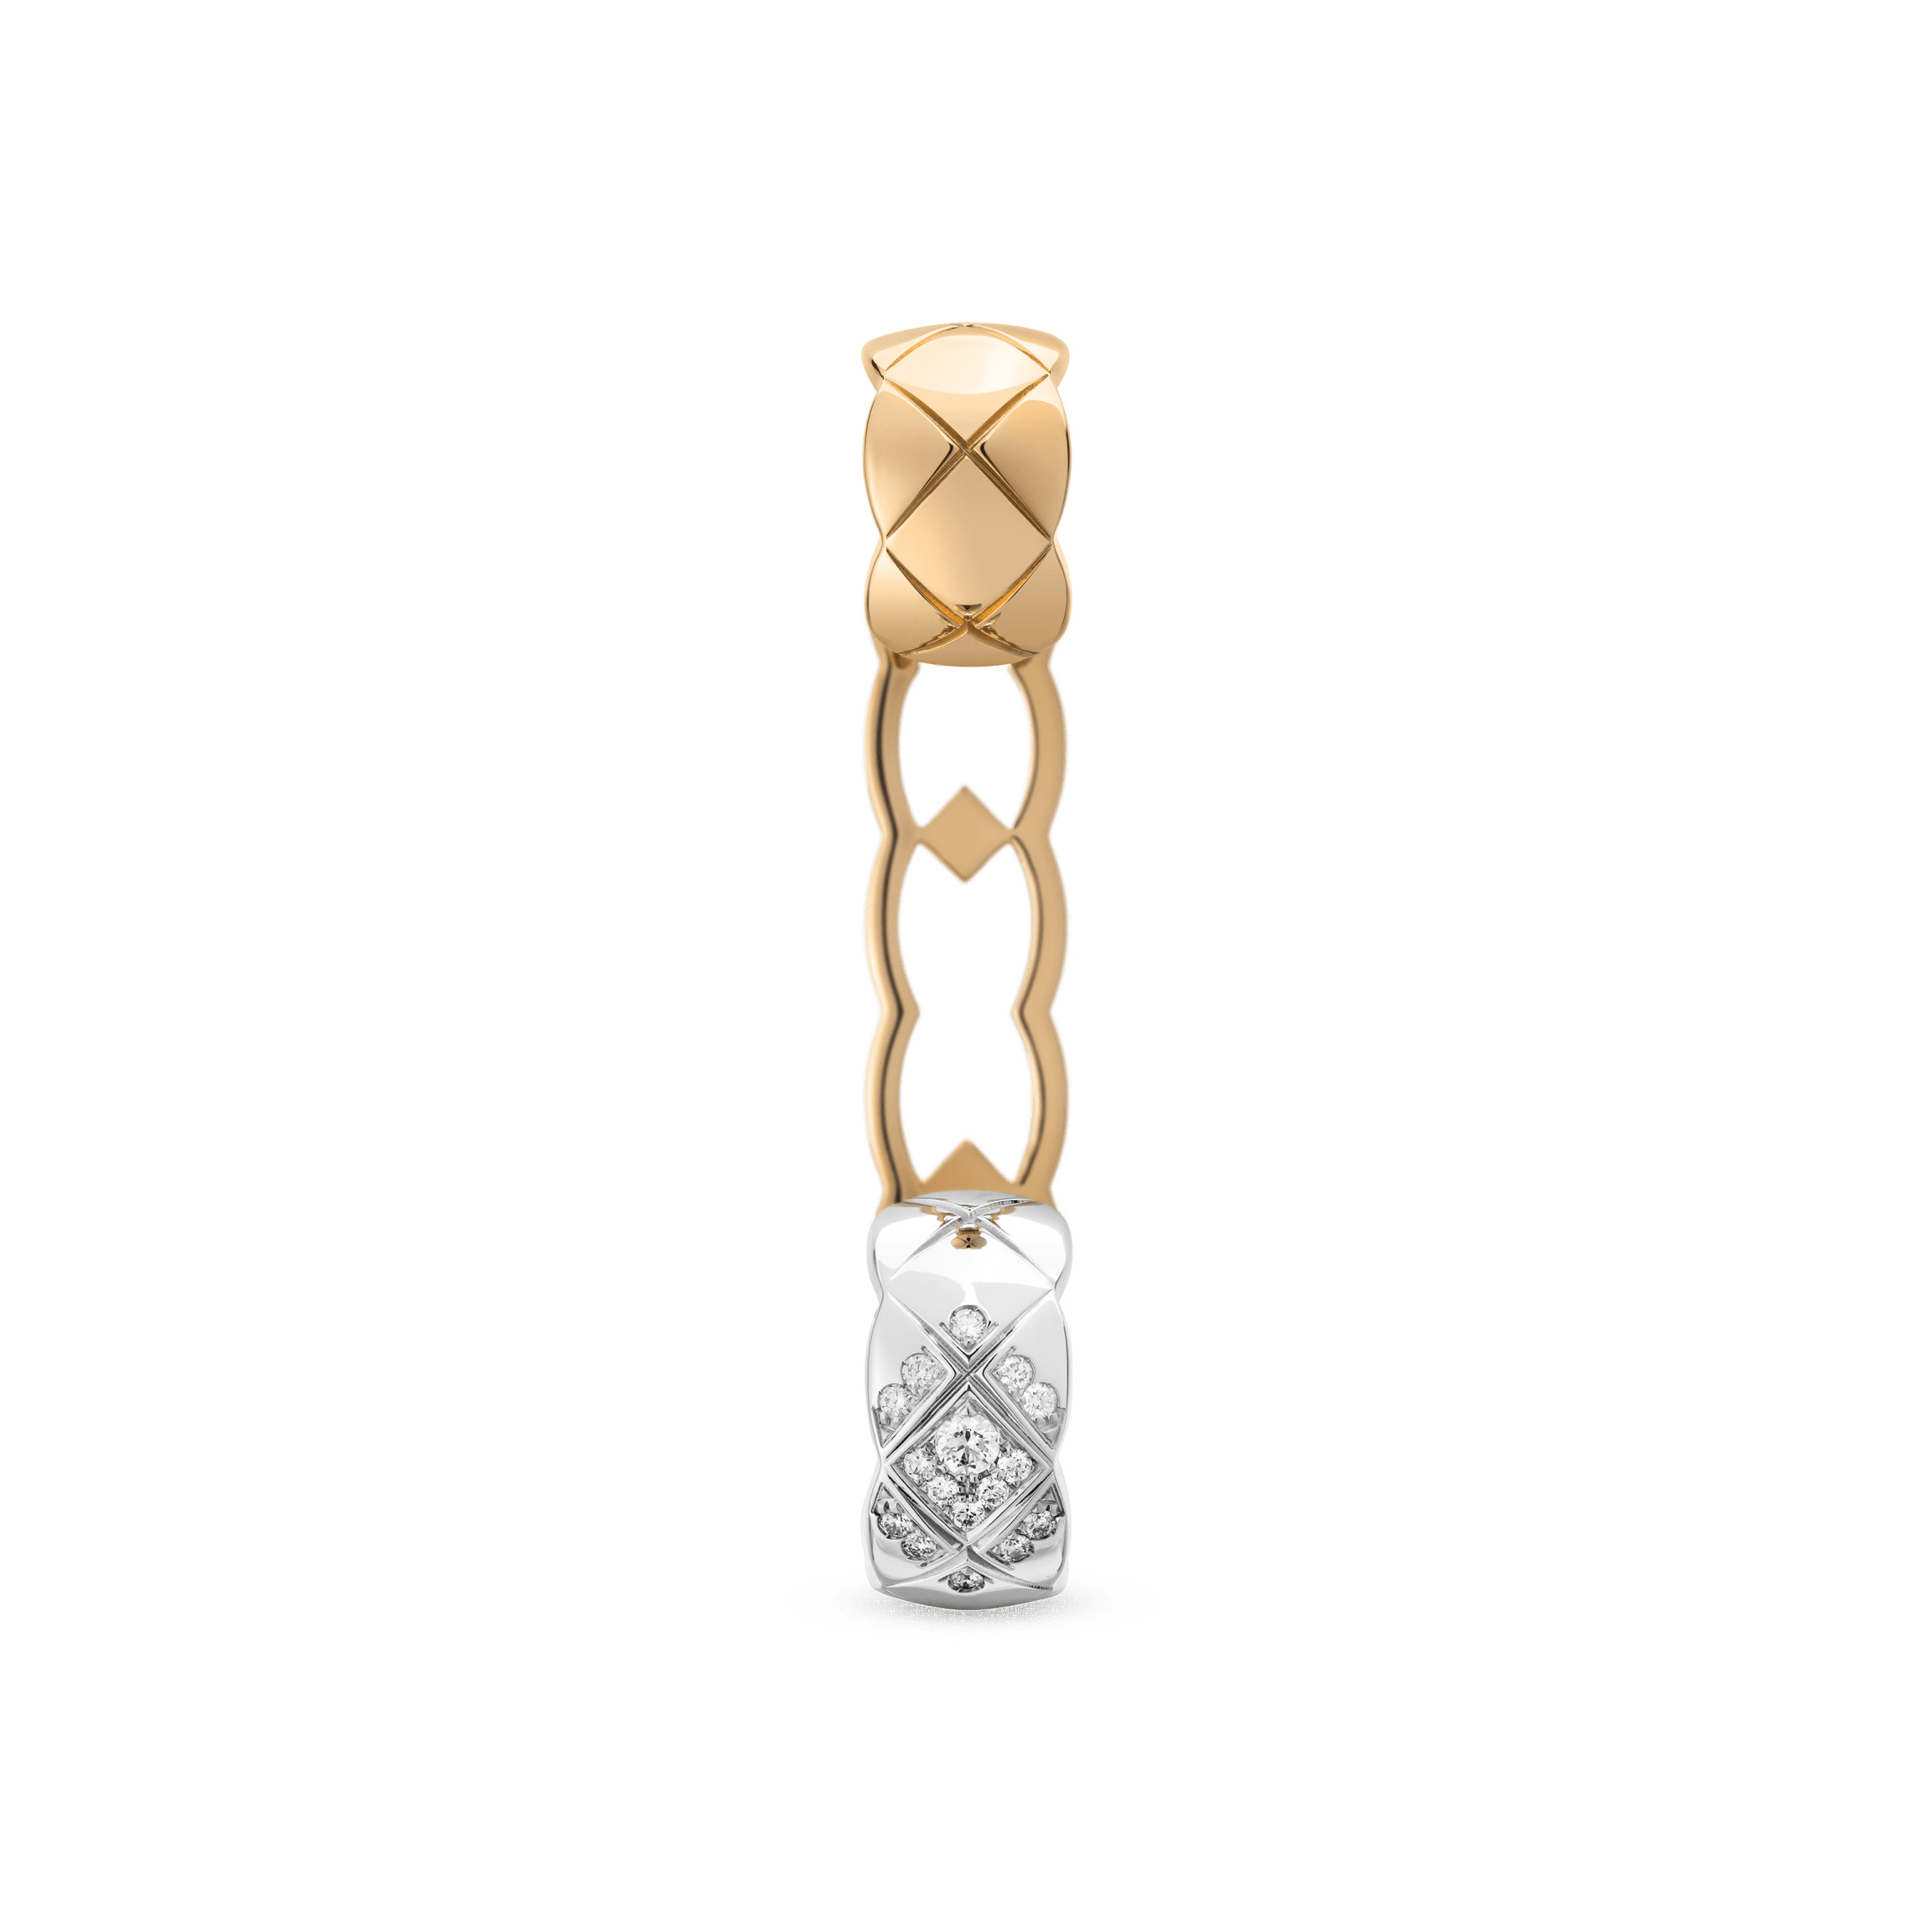 Coco Crush necklace, Quilted motif, 18K BEIGE GOLD, diamonds on the CHANEL  website.